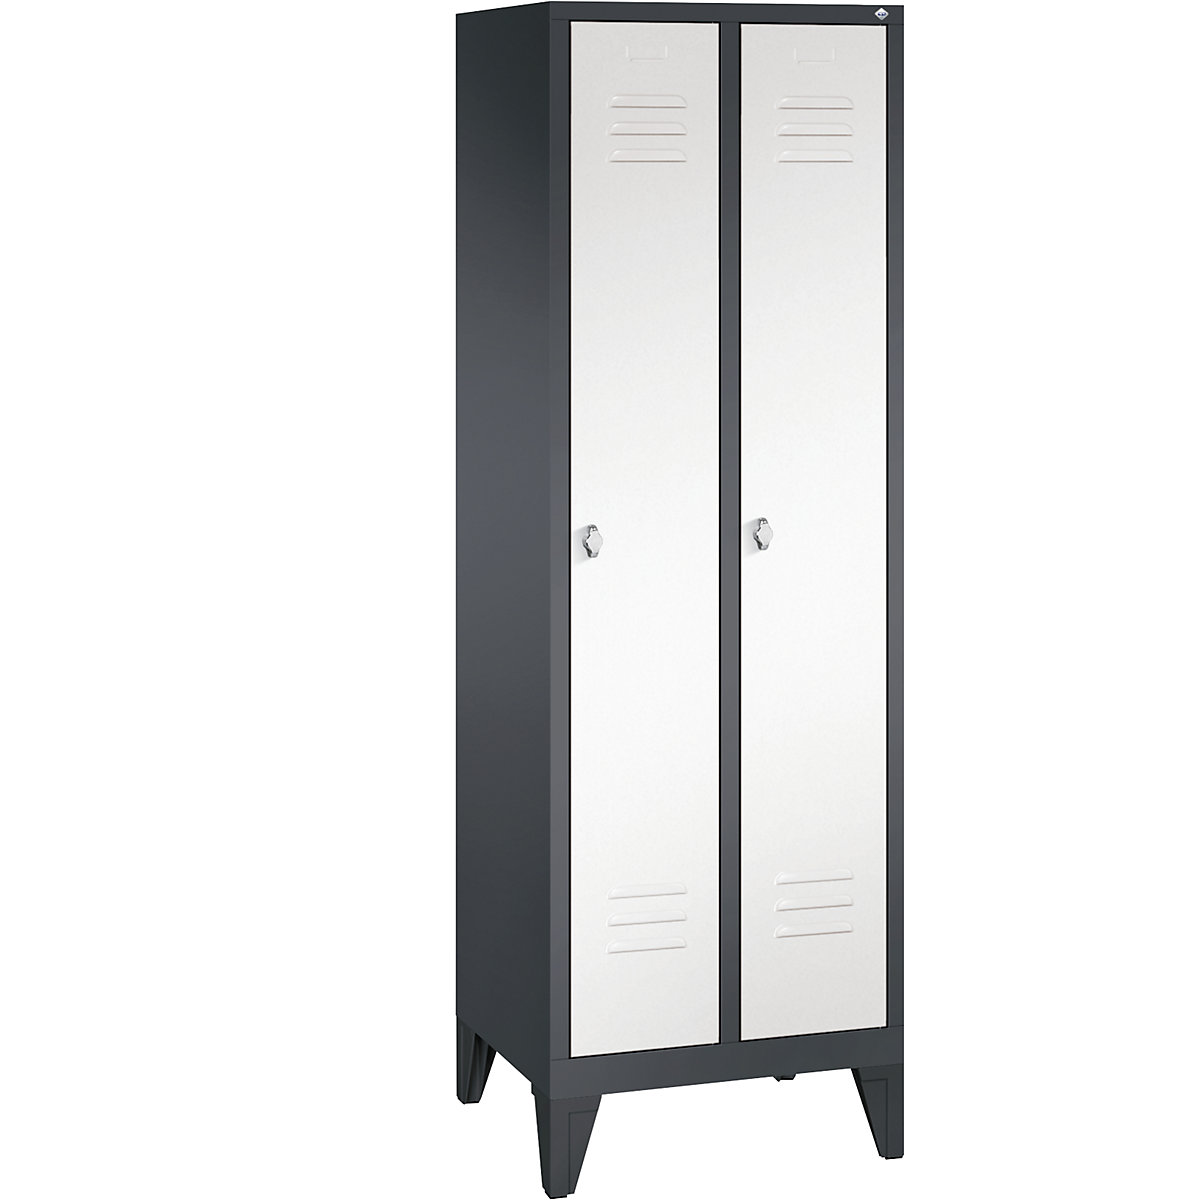 CLASSIC storage cupboard with feet – C+P, 2 compartments, compartment width 300 mm, black grey / traffic white-14